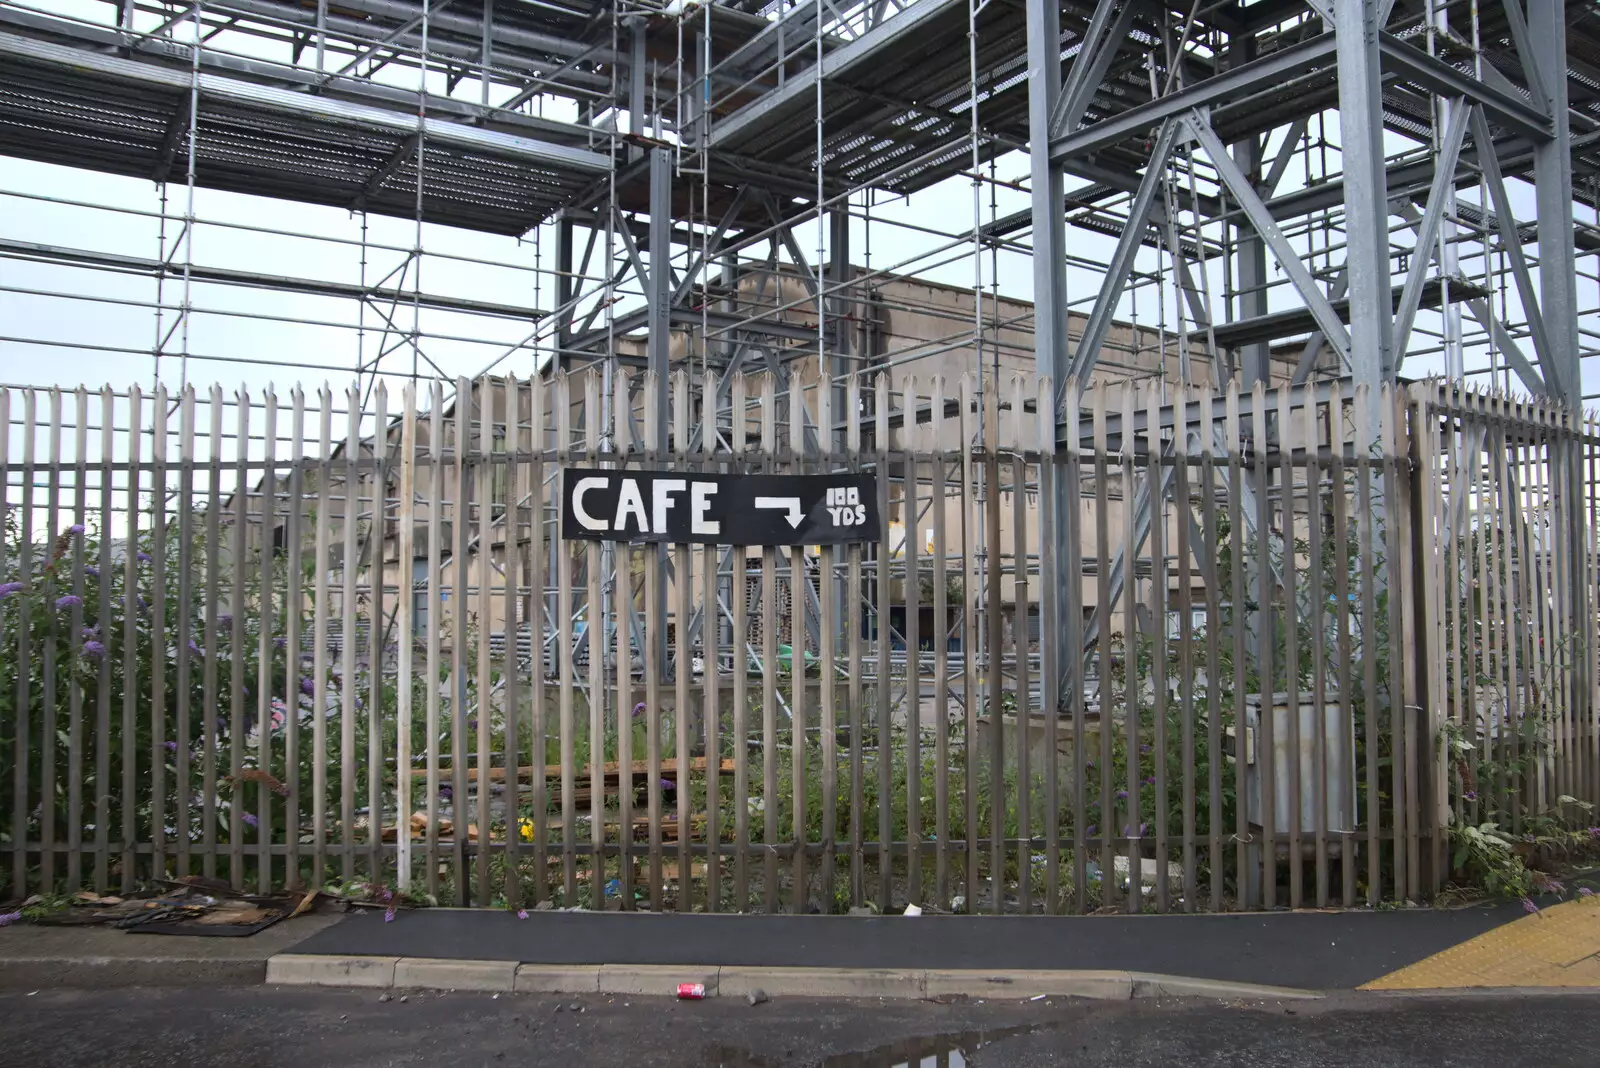 An abandoned Café sign on Regent Road, from Pork Pies and Dockside Dereliction, Melton Mowbray and Liverpool - 7th August 2021